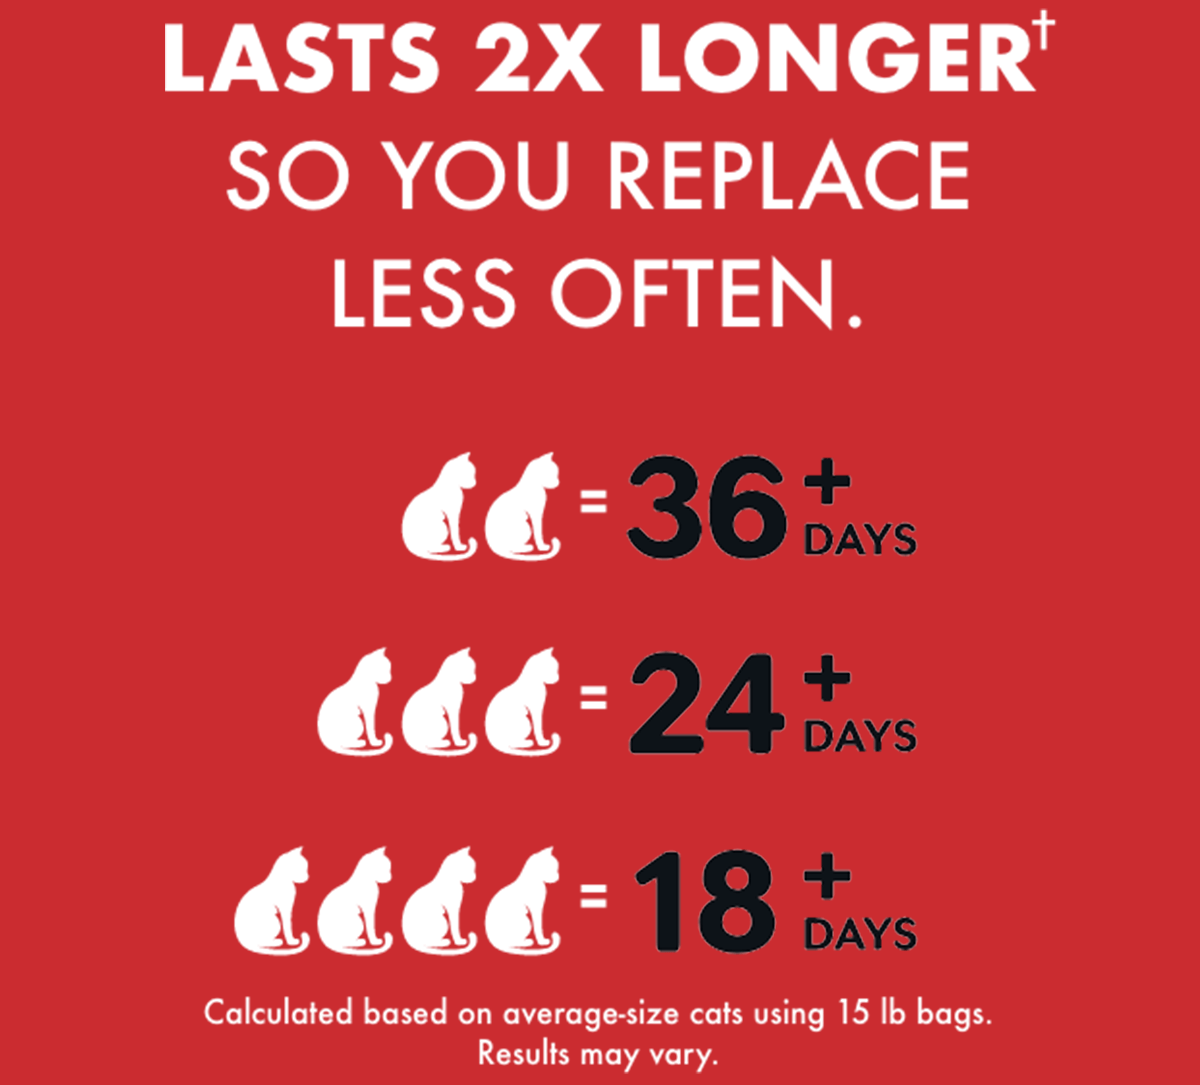 Lasts 2x longer† so you replace less often. ( 2 cats = 36+ days. 3 cats = 24+ days. 4 cats = 18+ days. ) Calculated based on average-size cats using 15 lb bags. Results may vary.